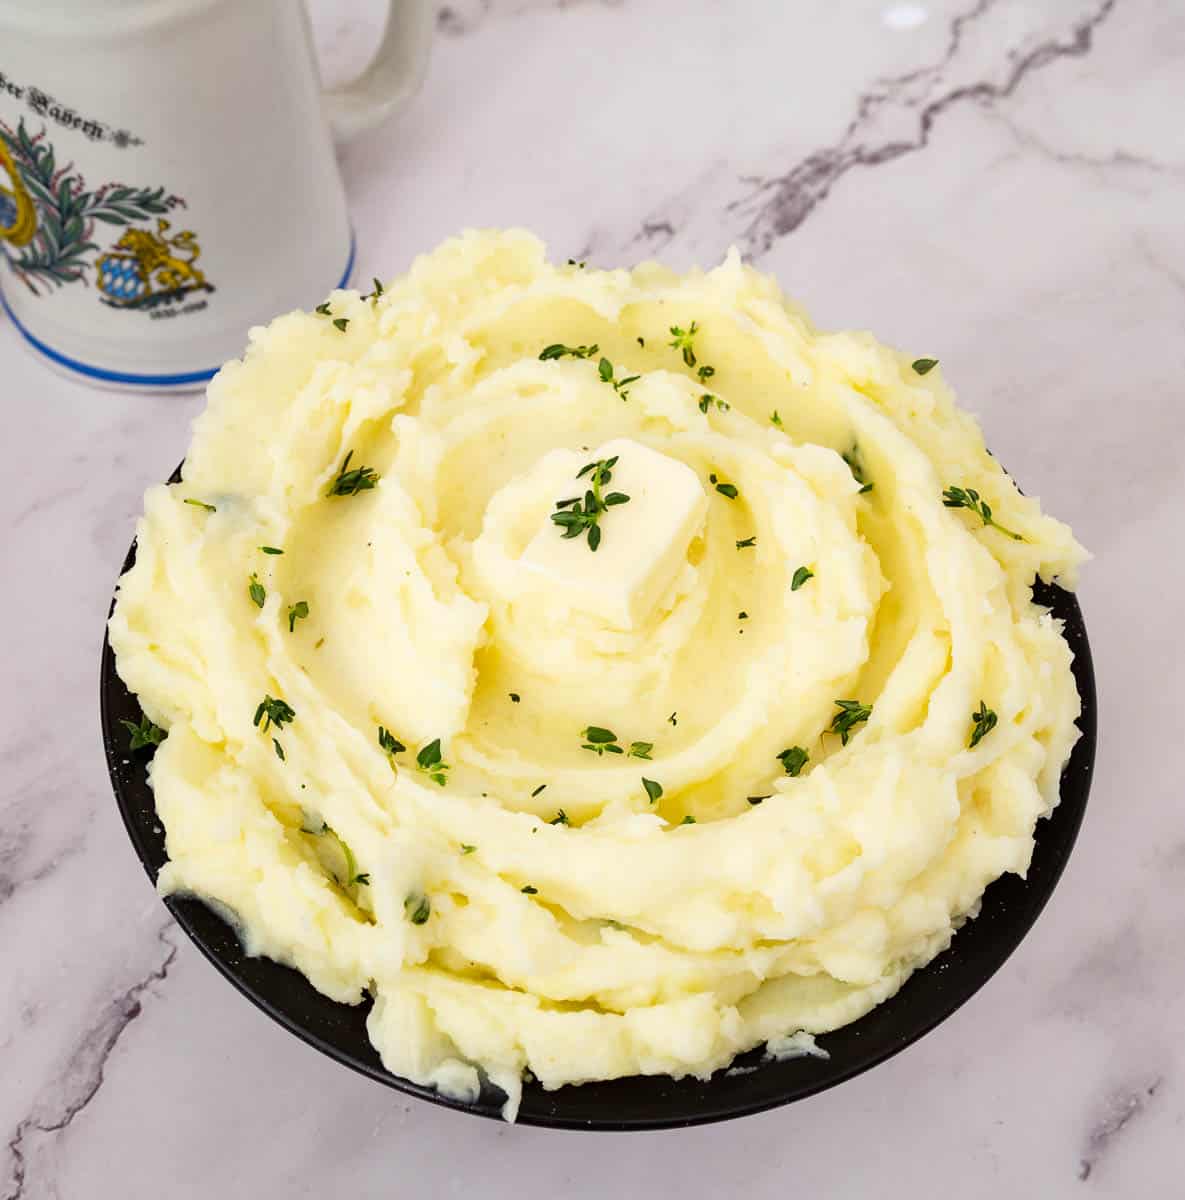 A bowl with potatoes mashed as a side dish.